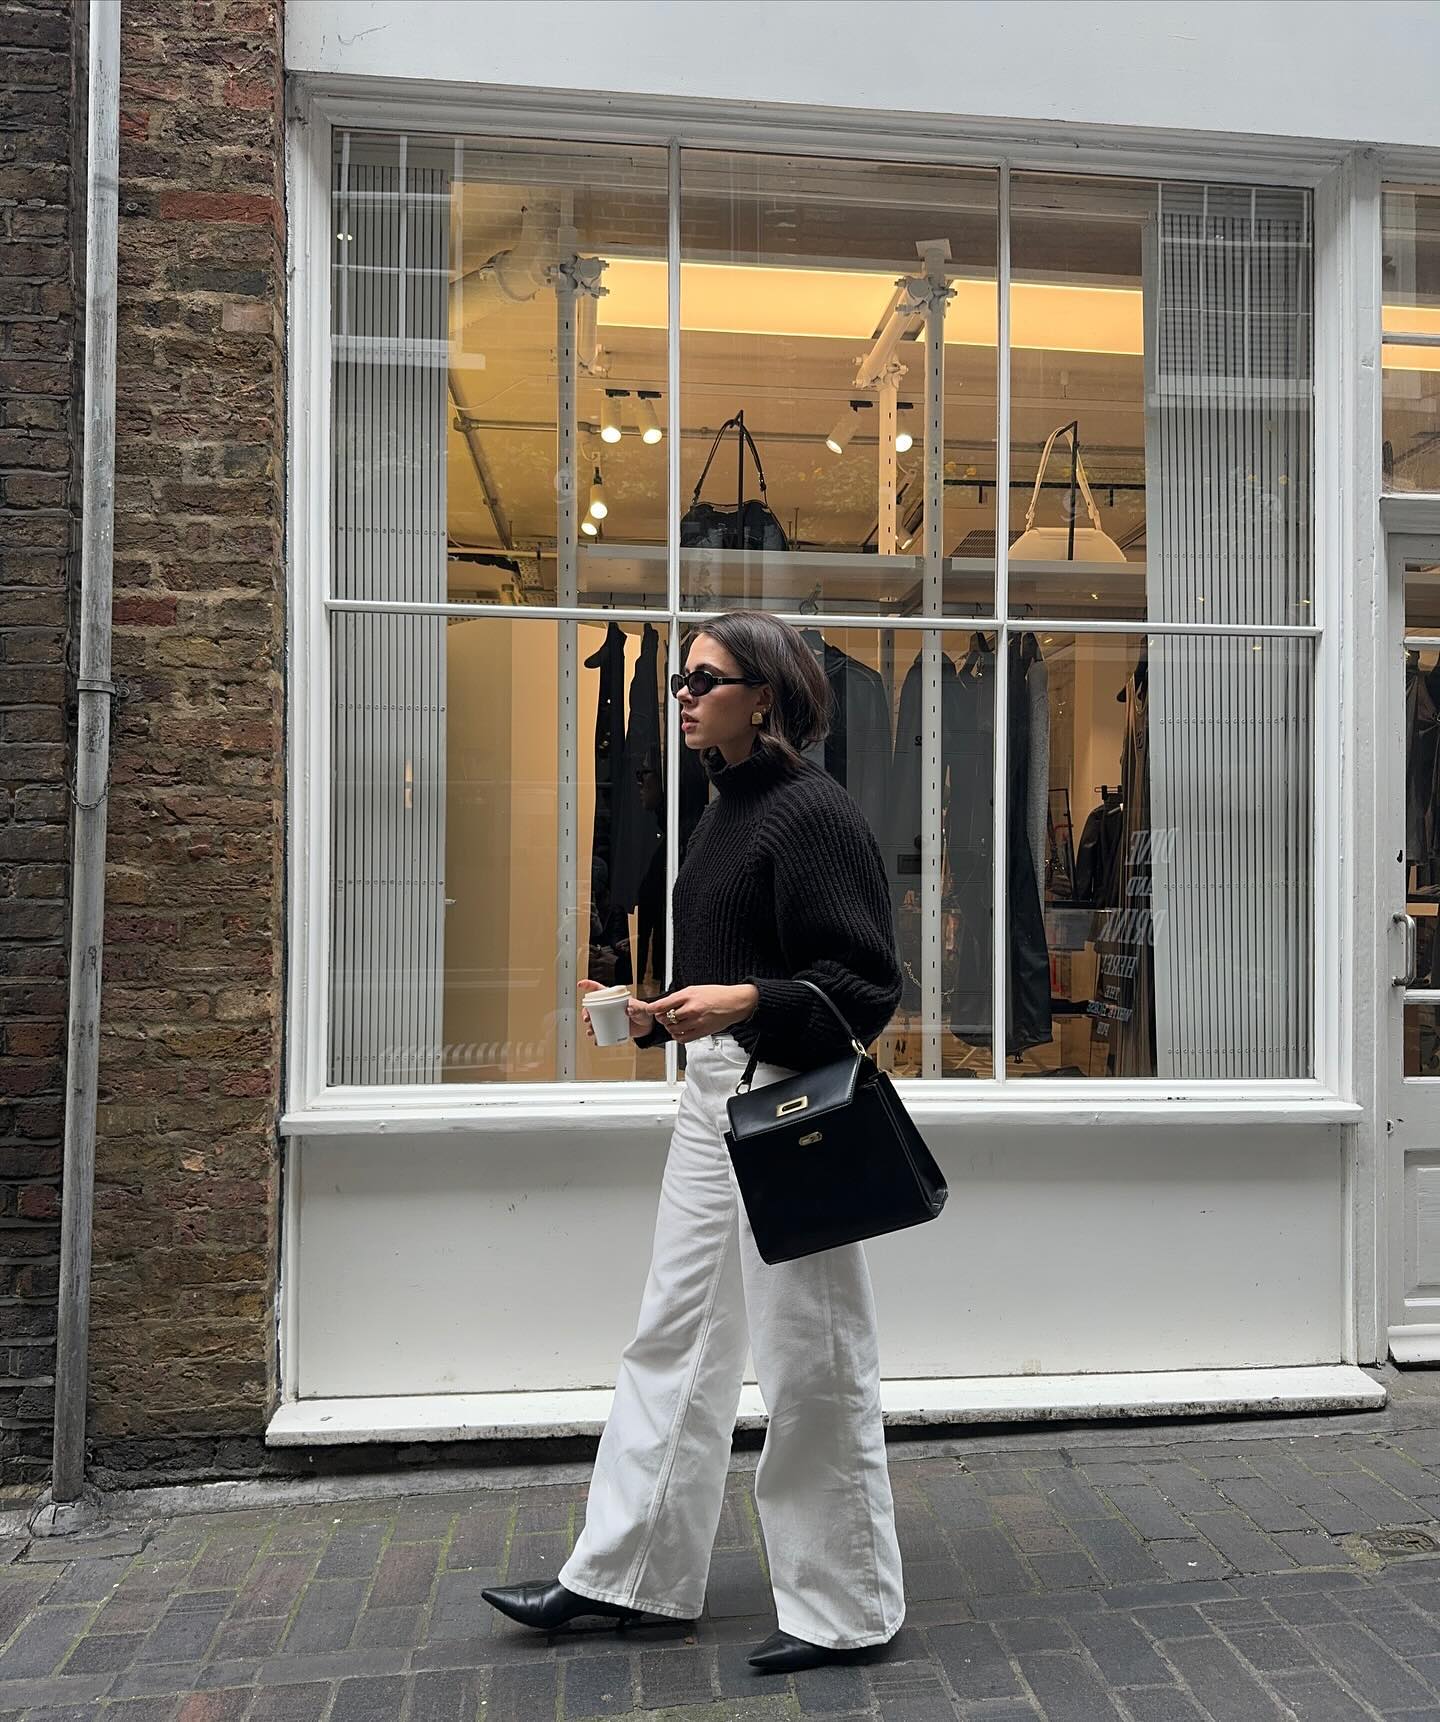 Influencer wears M&S top handle bag with white jeans and a black jumper.